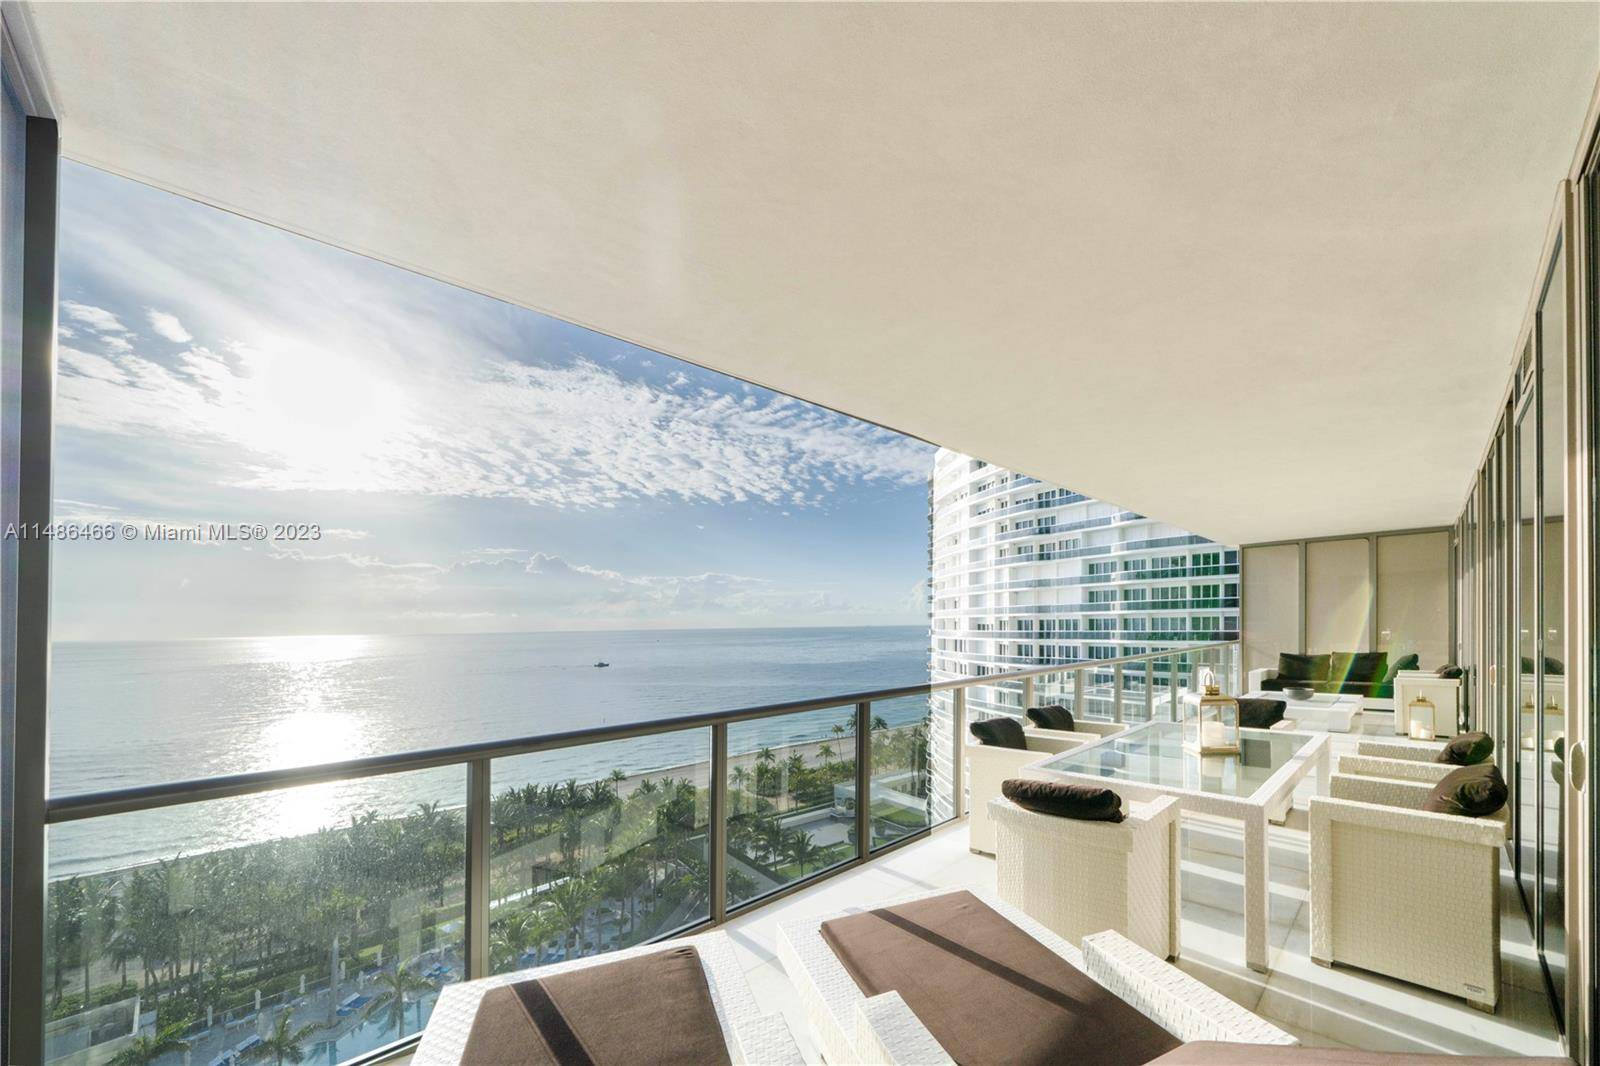 Experience the epitome of luxury oceanfront living at the St.